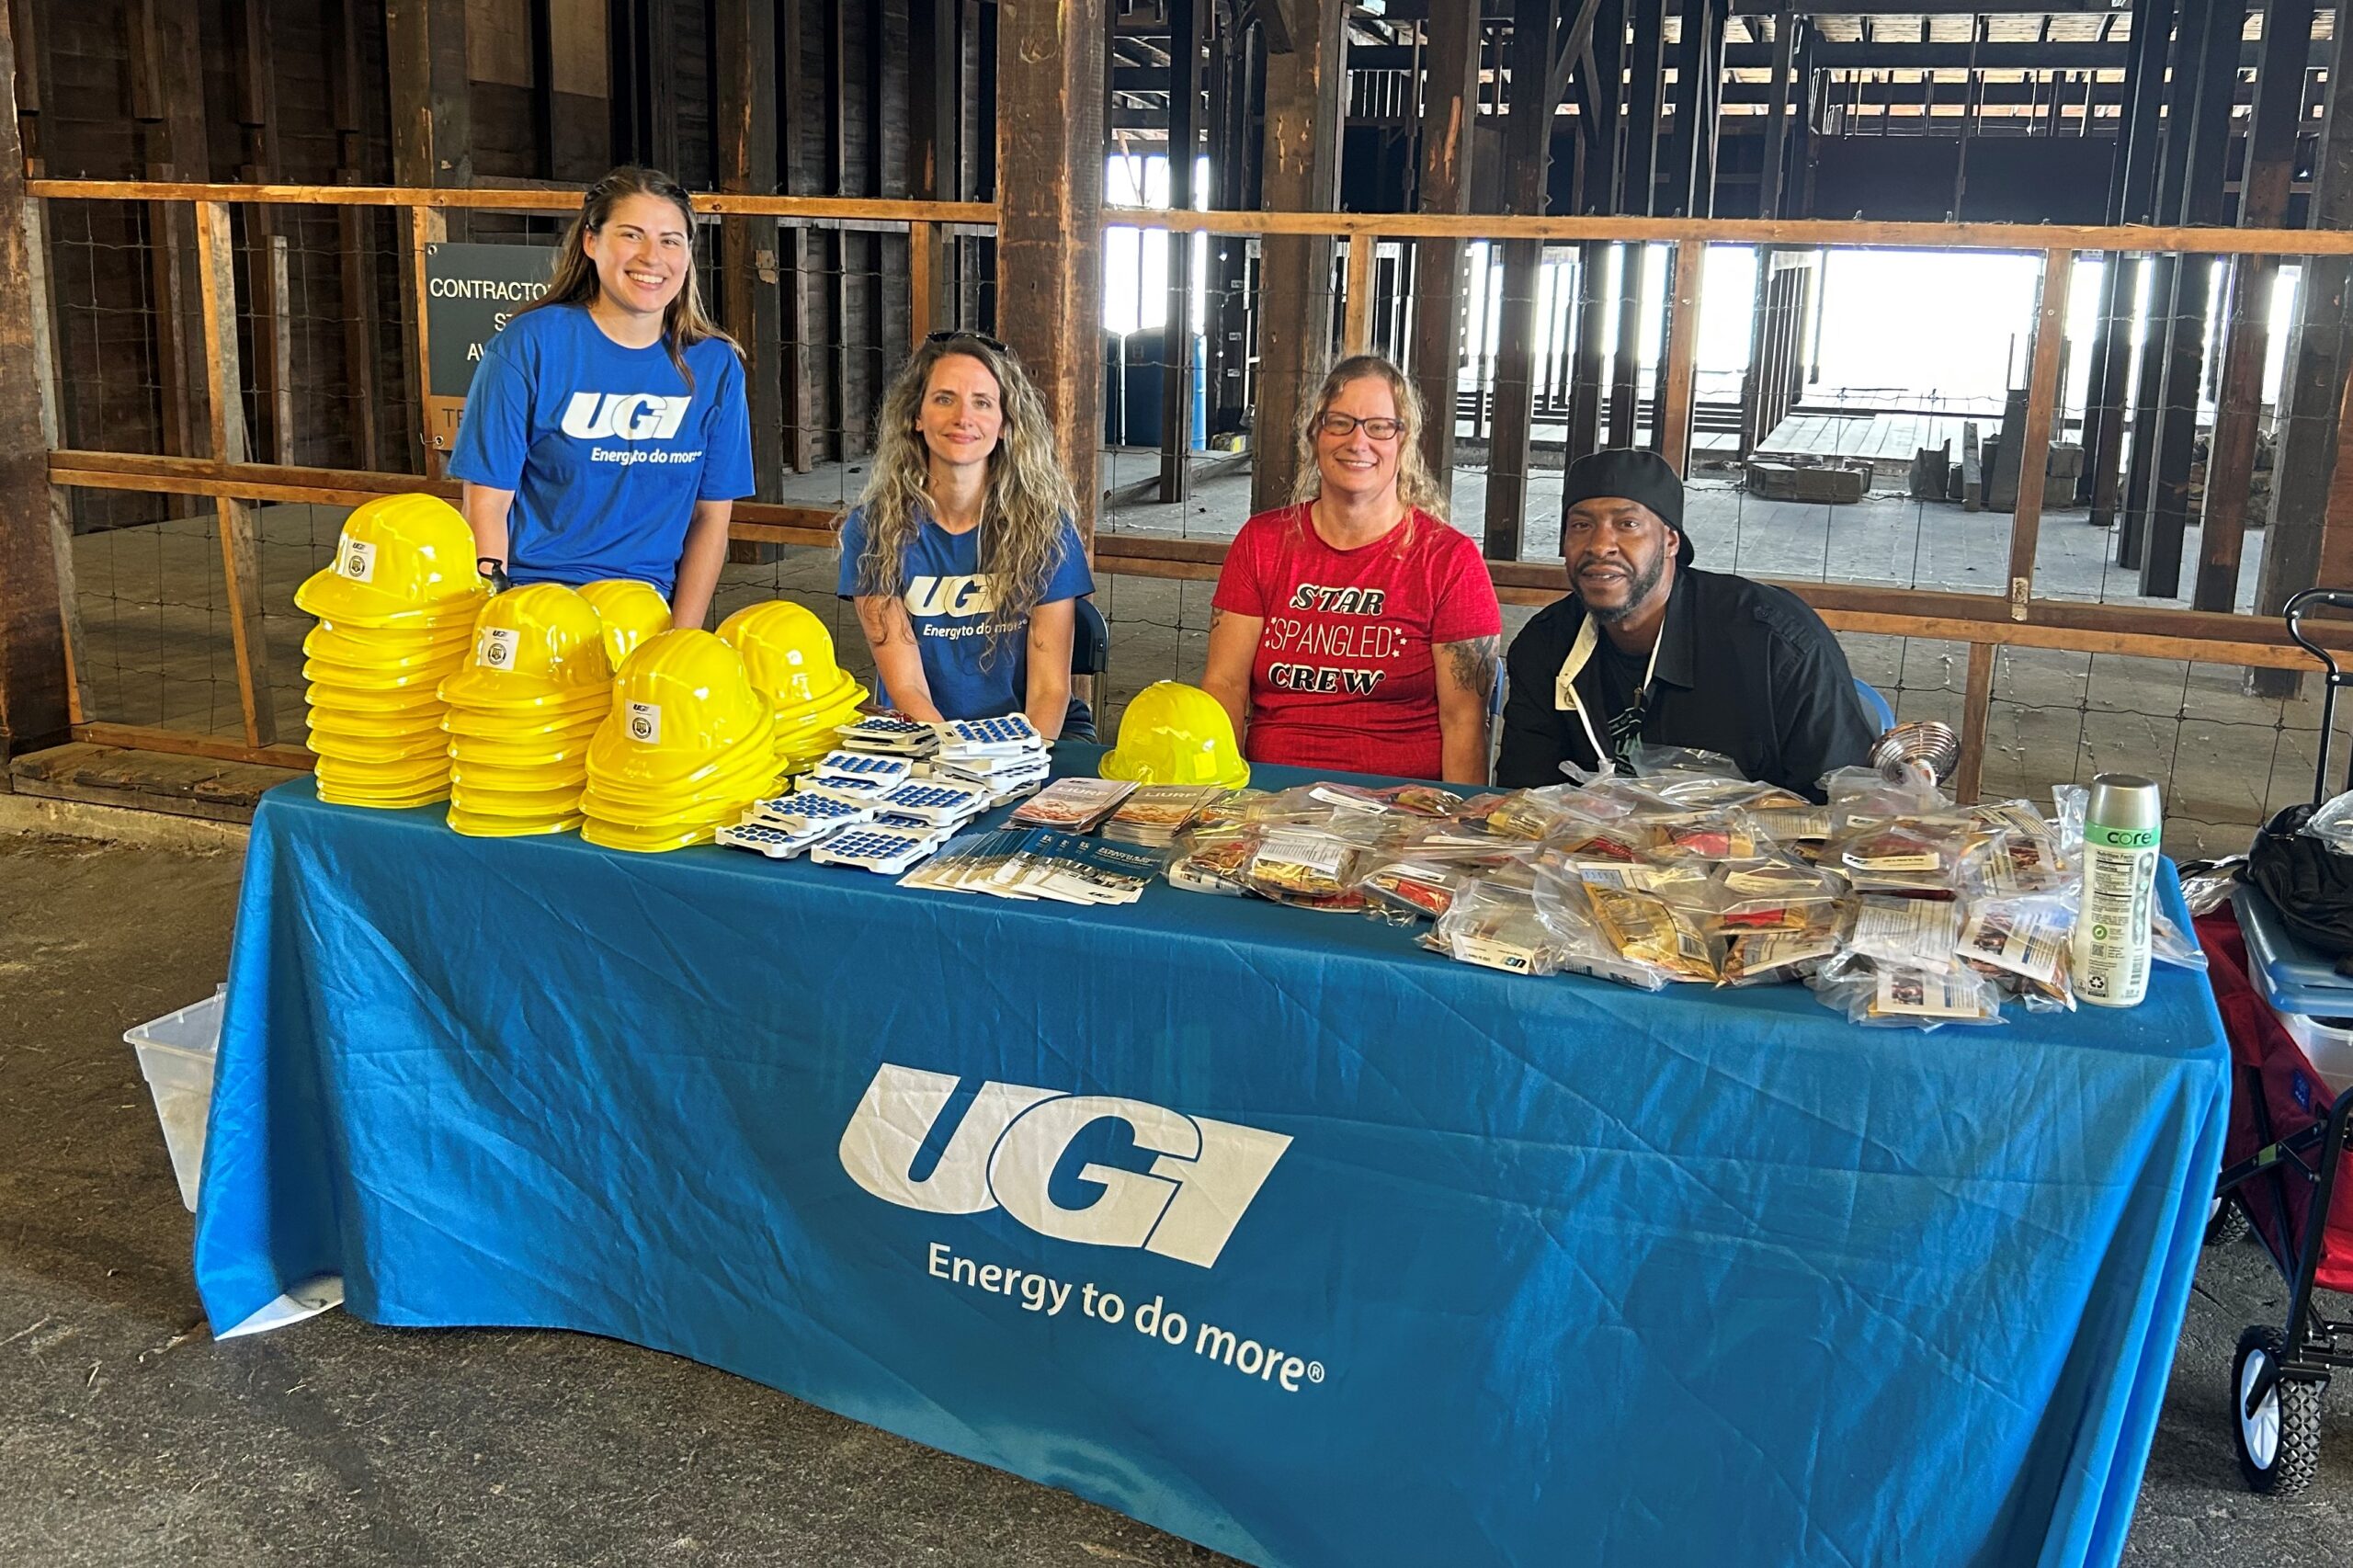 UGI employees at booth with safety hats and other merch for Customer Assistance Programs